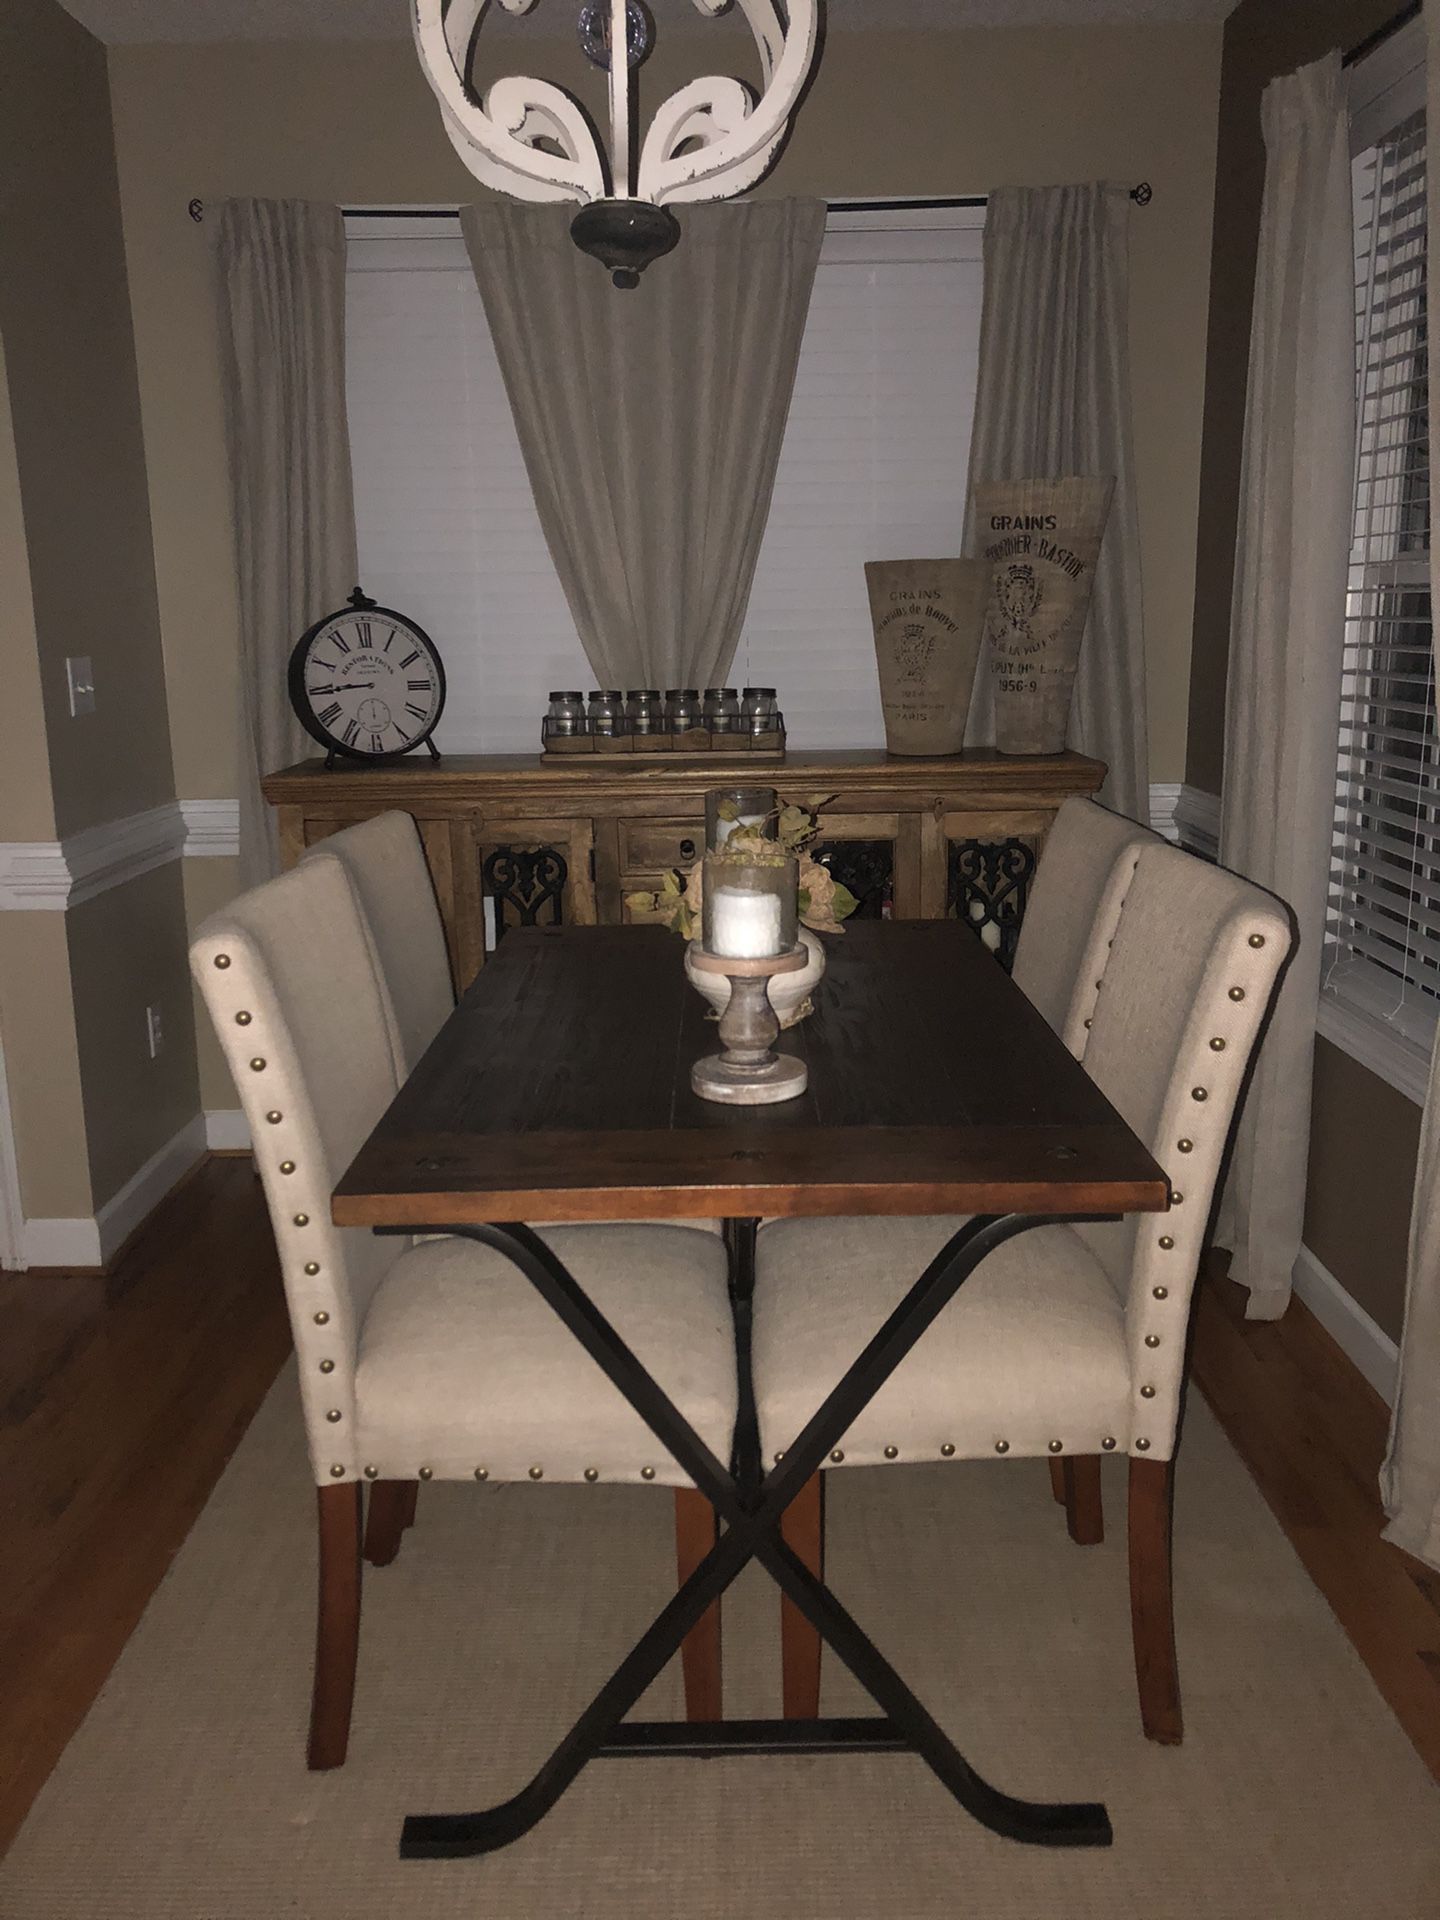 Table sold with 4 stools. Chairs are not included.